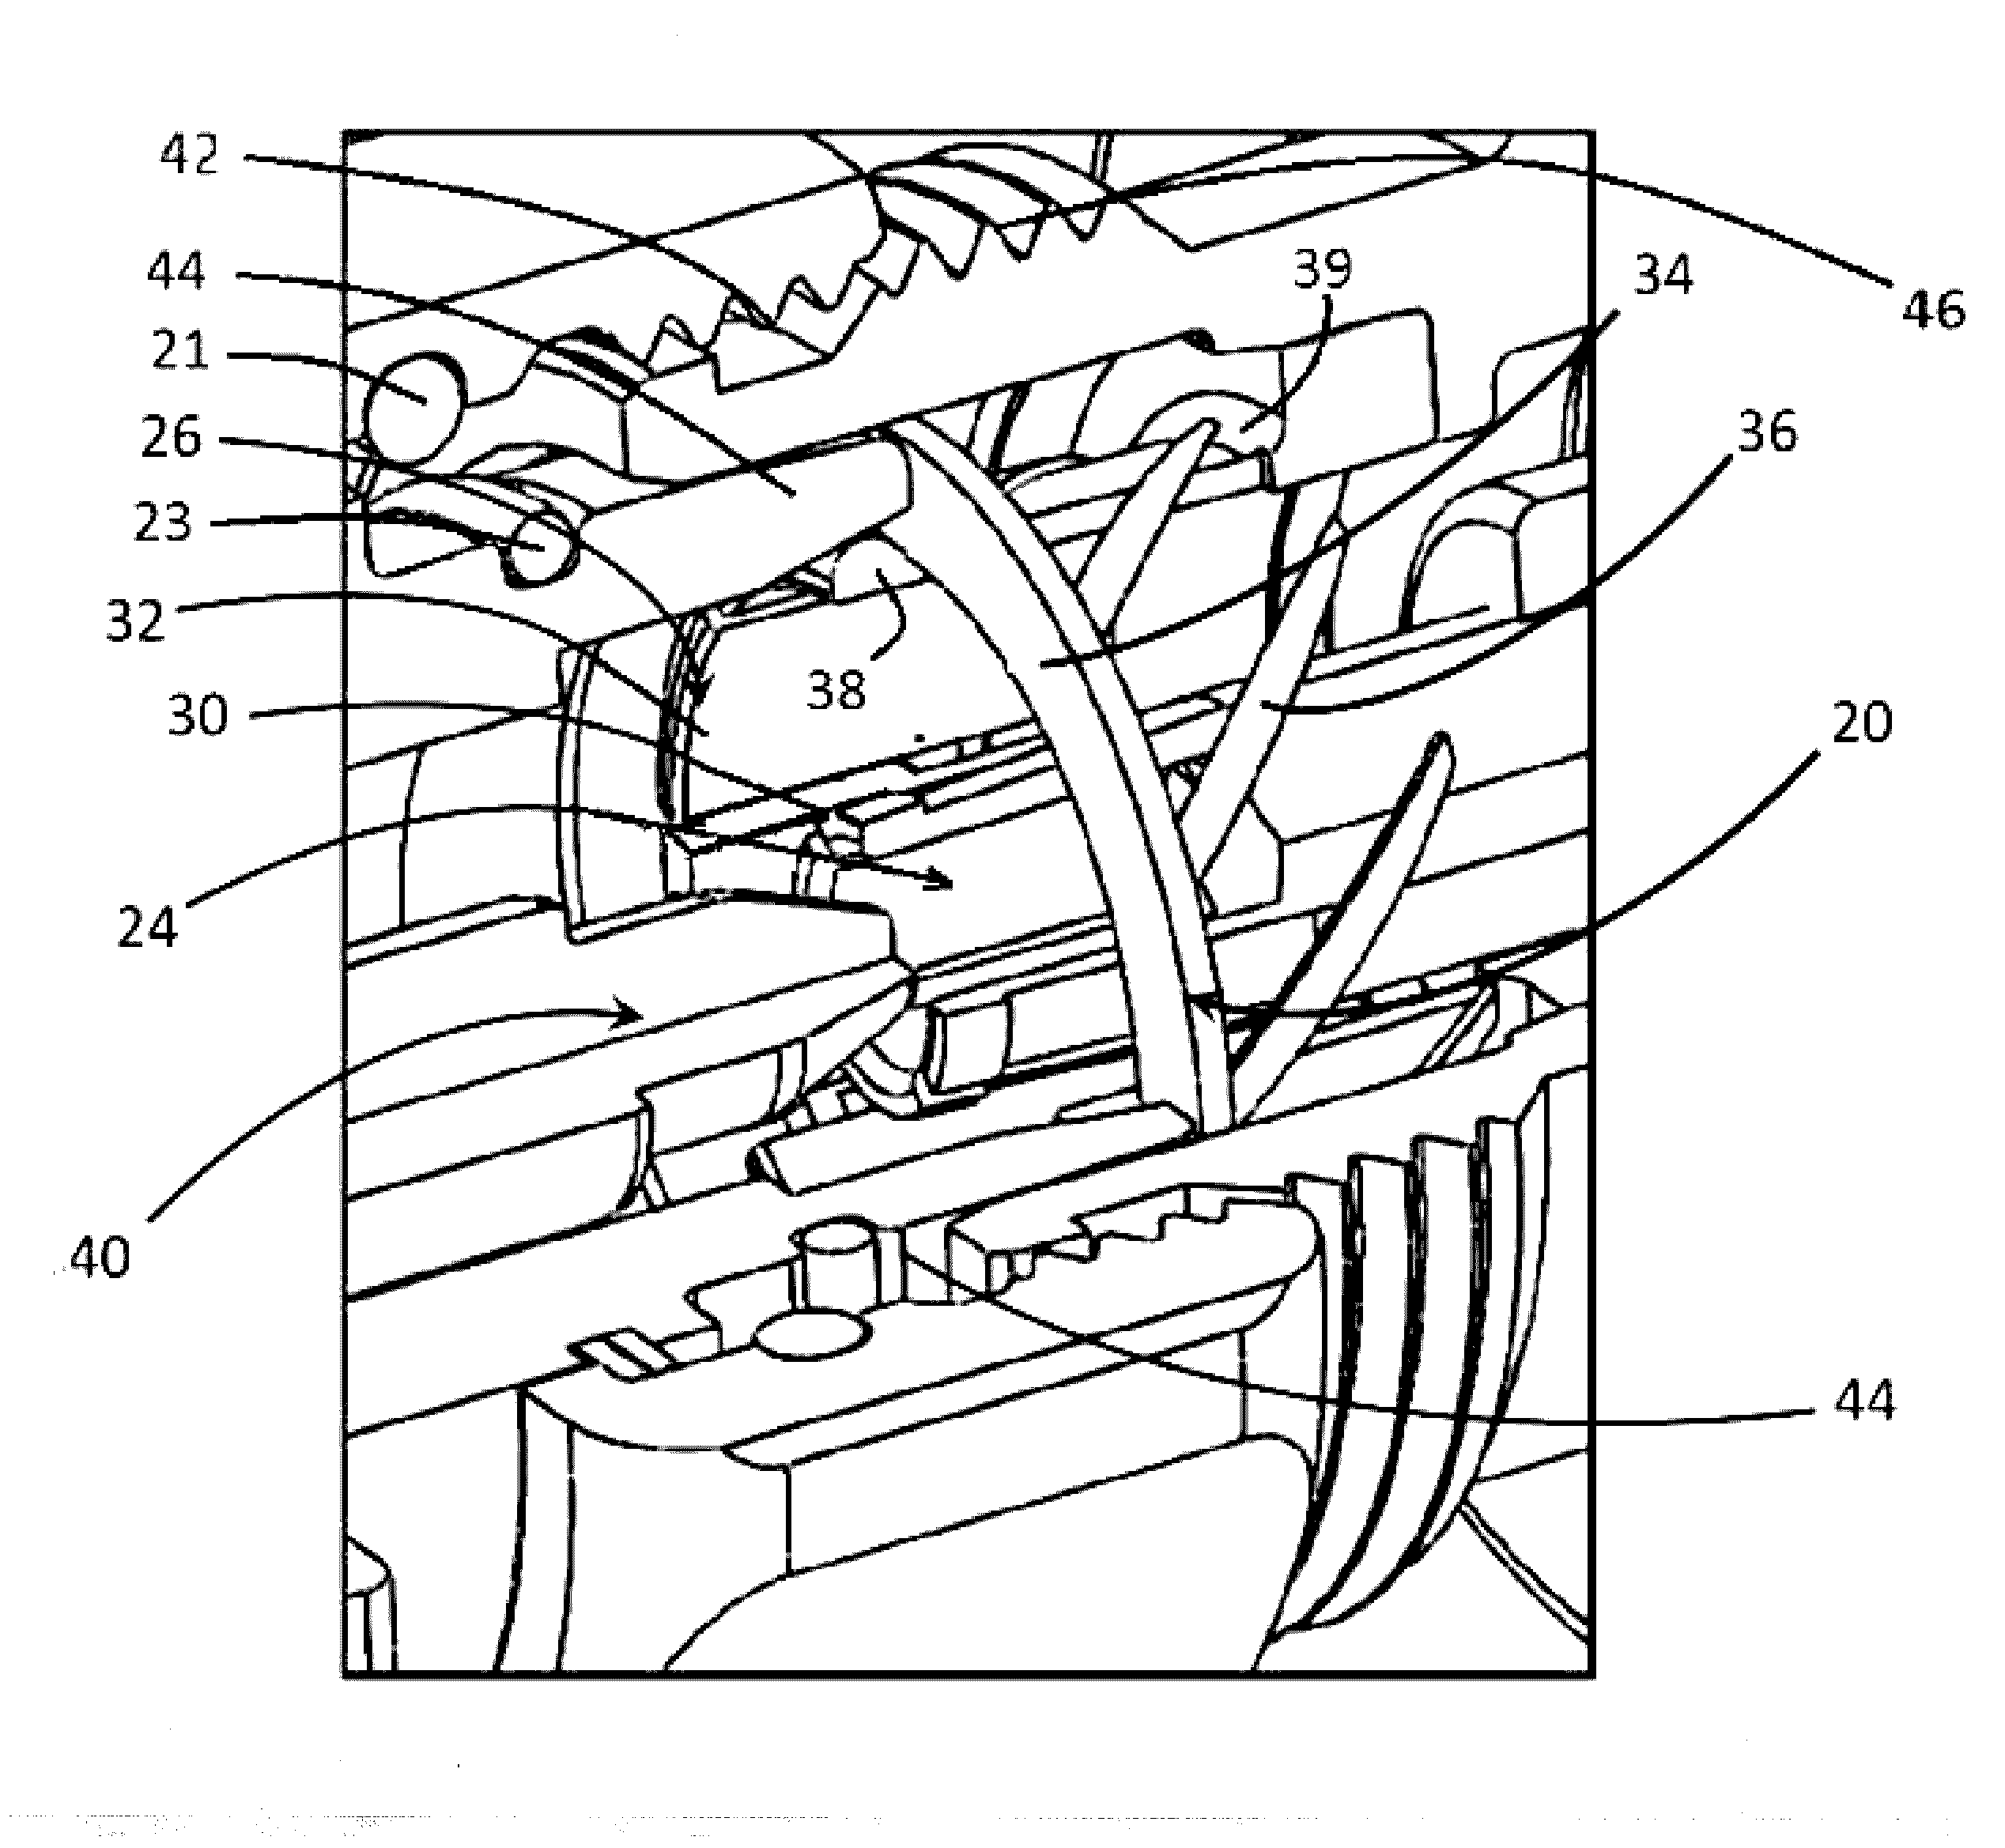 Device and method for  protecting spring-biased conductor elements